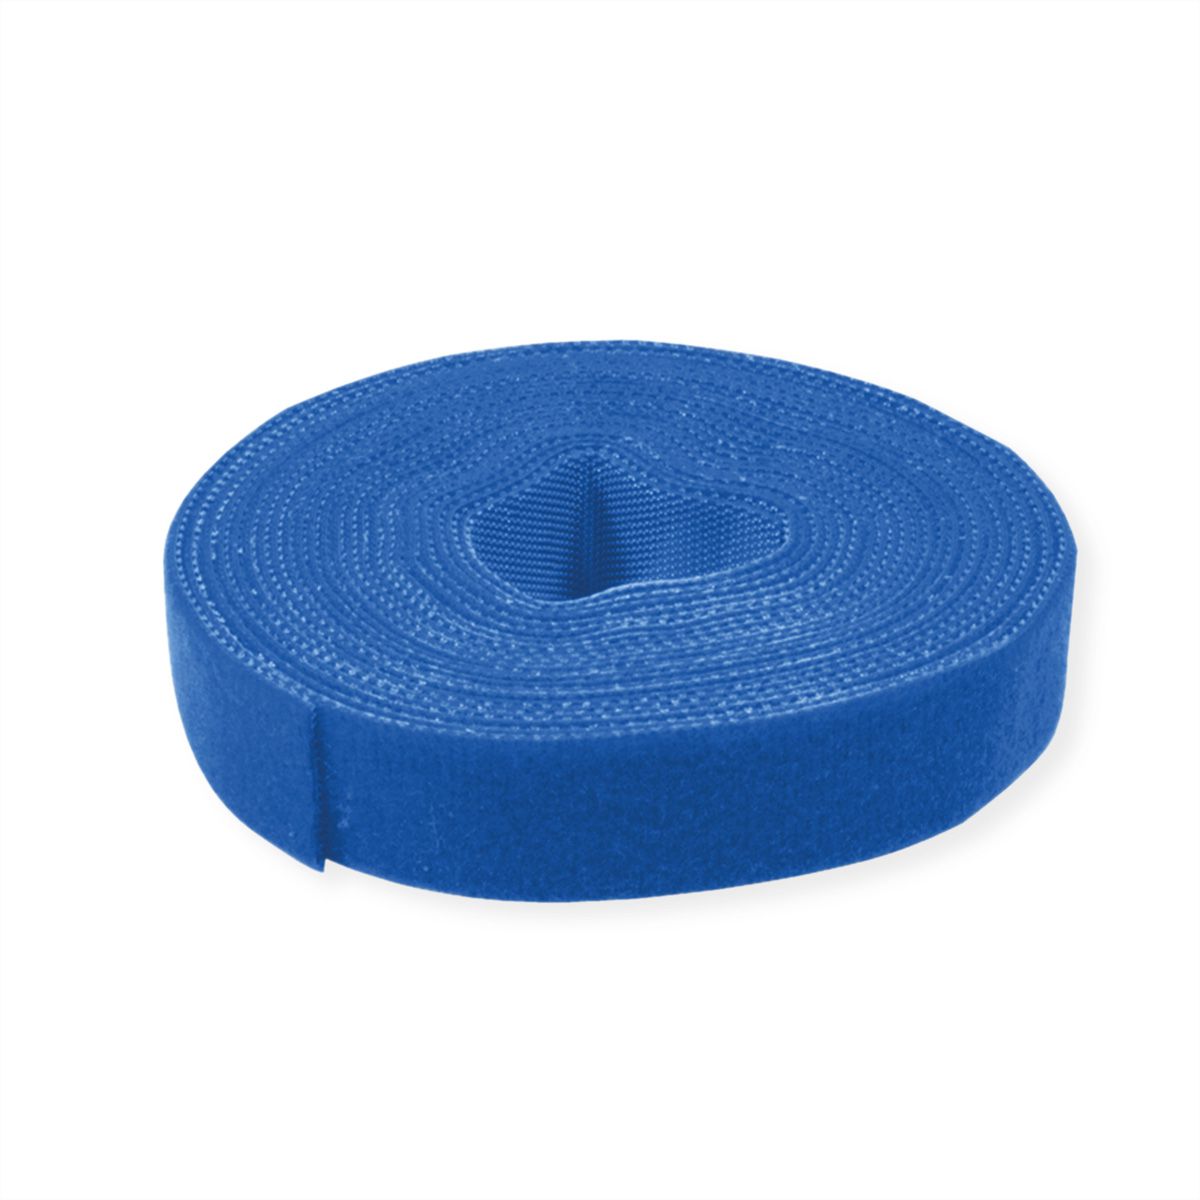 VALUE Strap Cable Tie Roll, Width 10mm, blue, 25 m - SECOMP ...